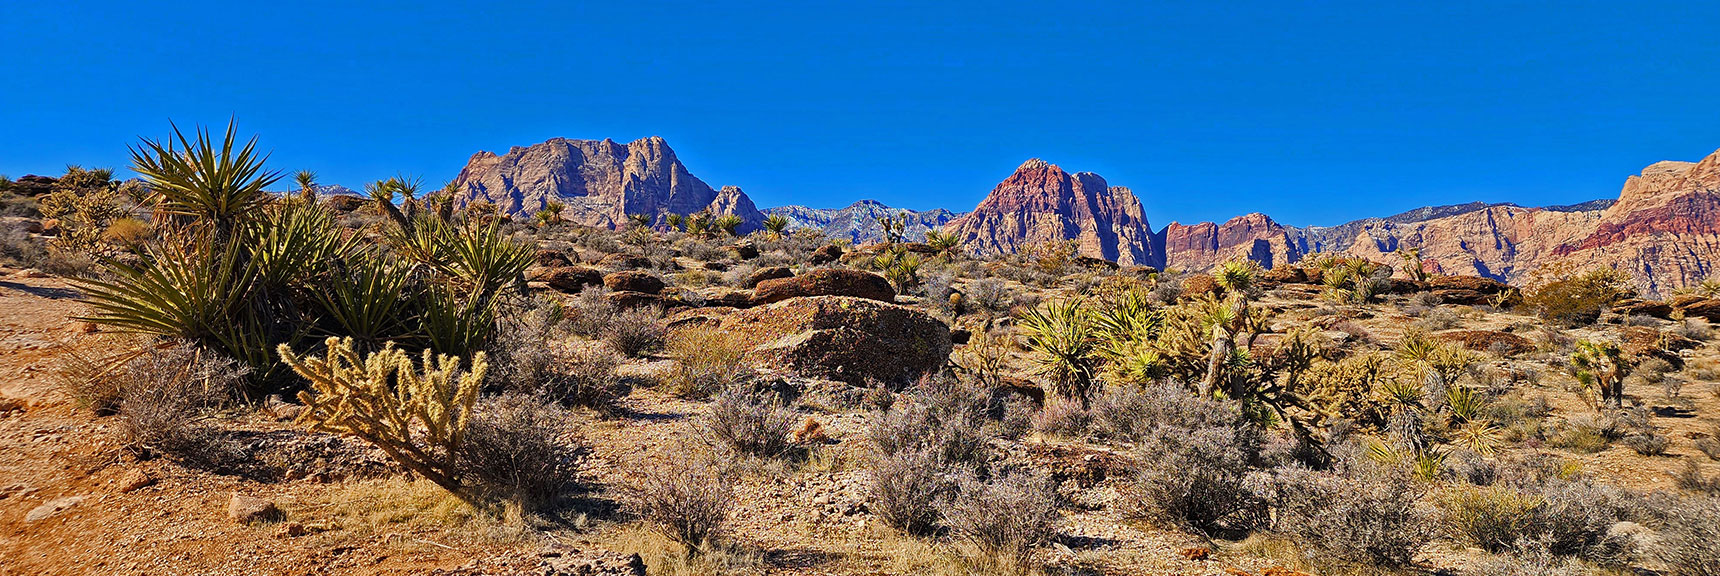 Crossing Through Desert Gardens to Bunny Trail, Rainbow Mts. Backdrop | Western Trails and Ridges | Blue Diamond Hill | Red Rock Canyon, Nevada